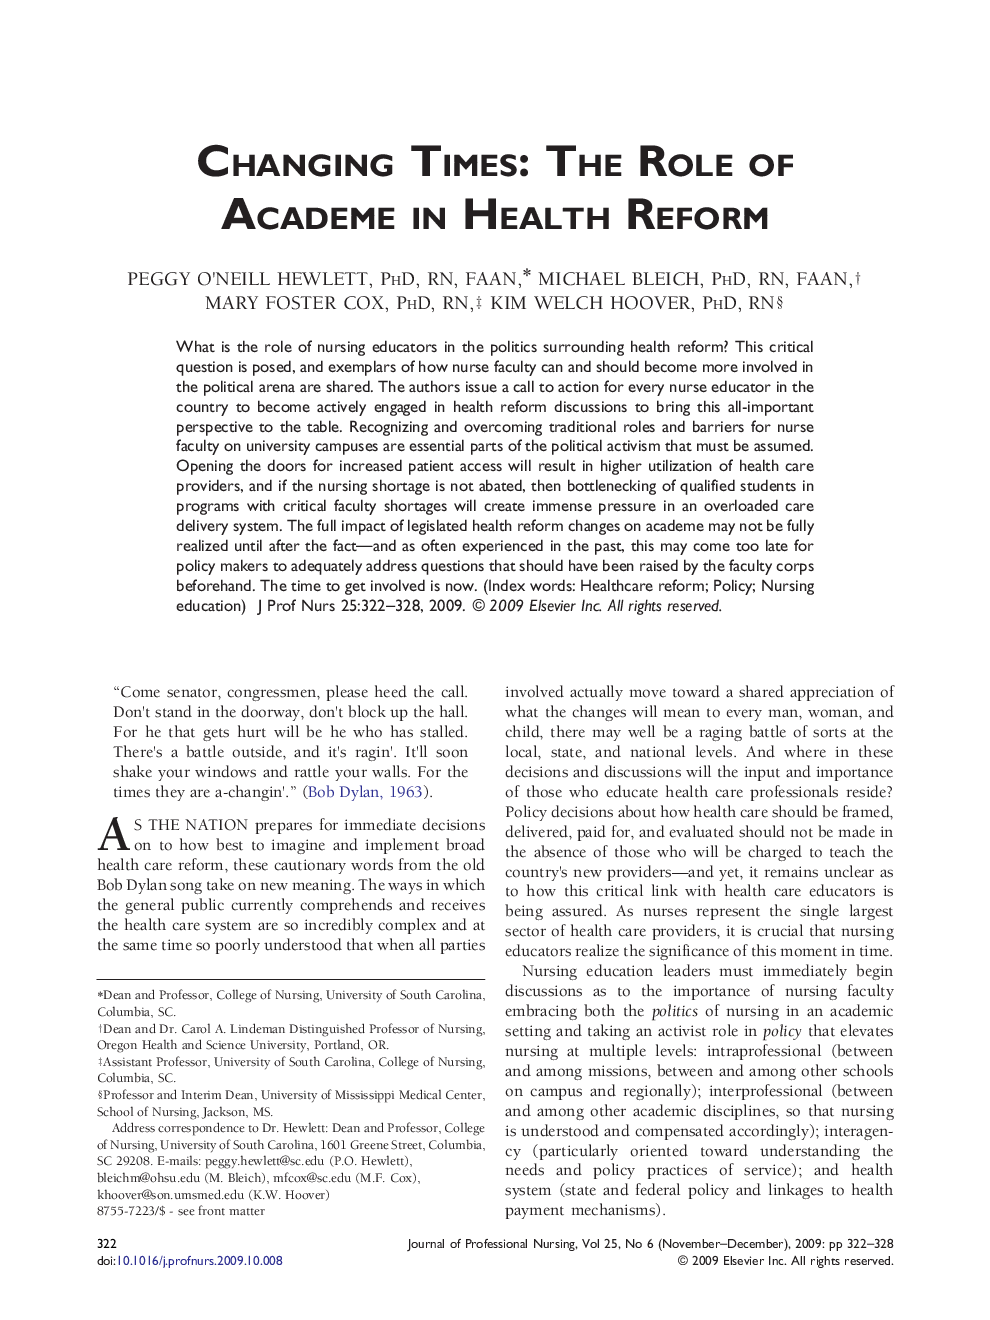 Changing Times: The Role of Academe in Health Reform